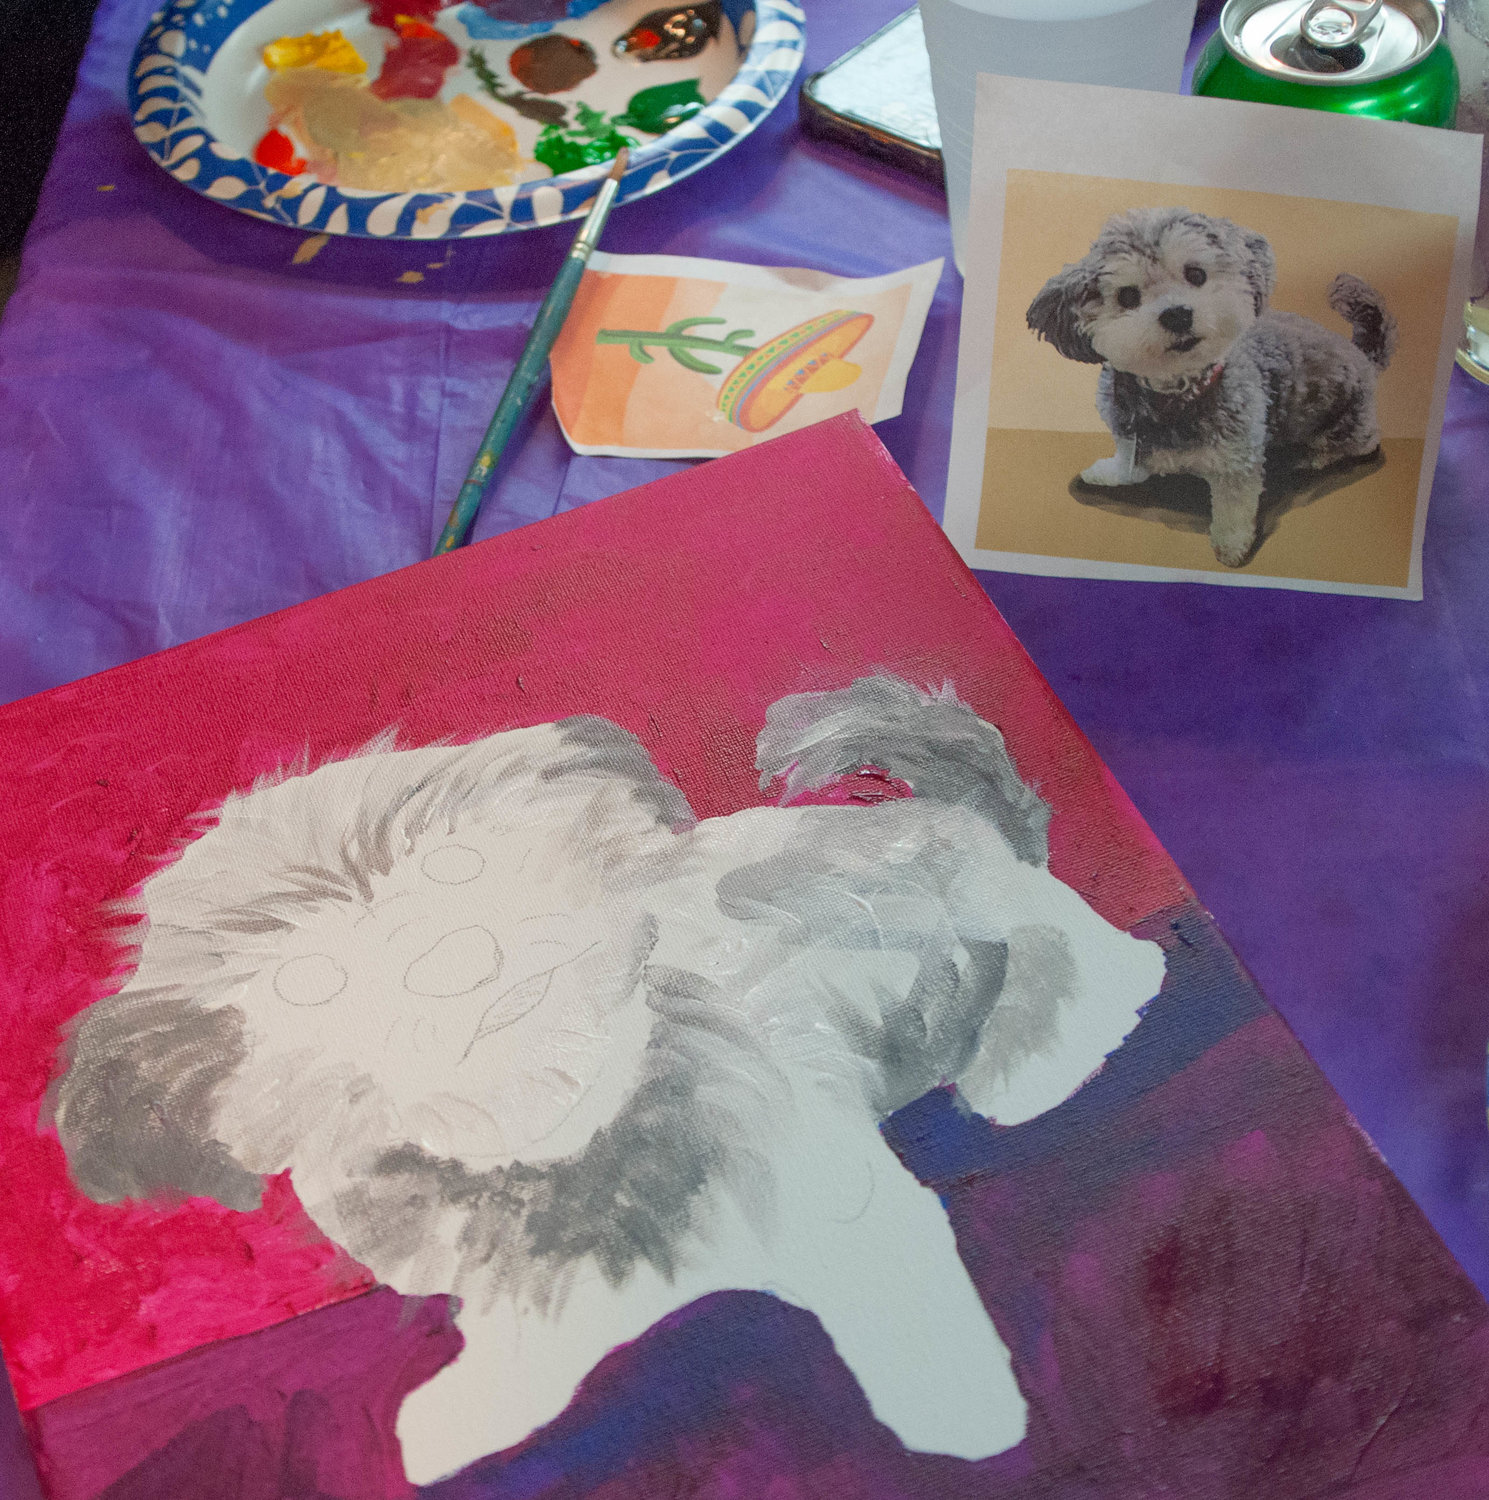 I moaned that Dharma looked more like a leprechaun than a dog. "Just keep referring to the photo and paint what you see," teaching artist Kim M. Simons instructed me during the Paint Party at Hector's Inn. "It's not bad!”